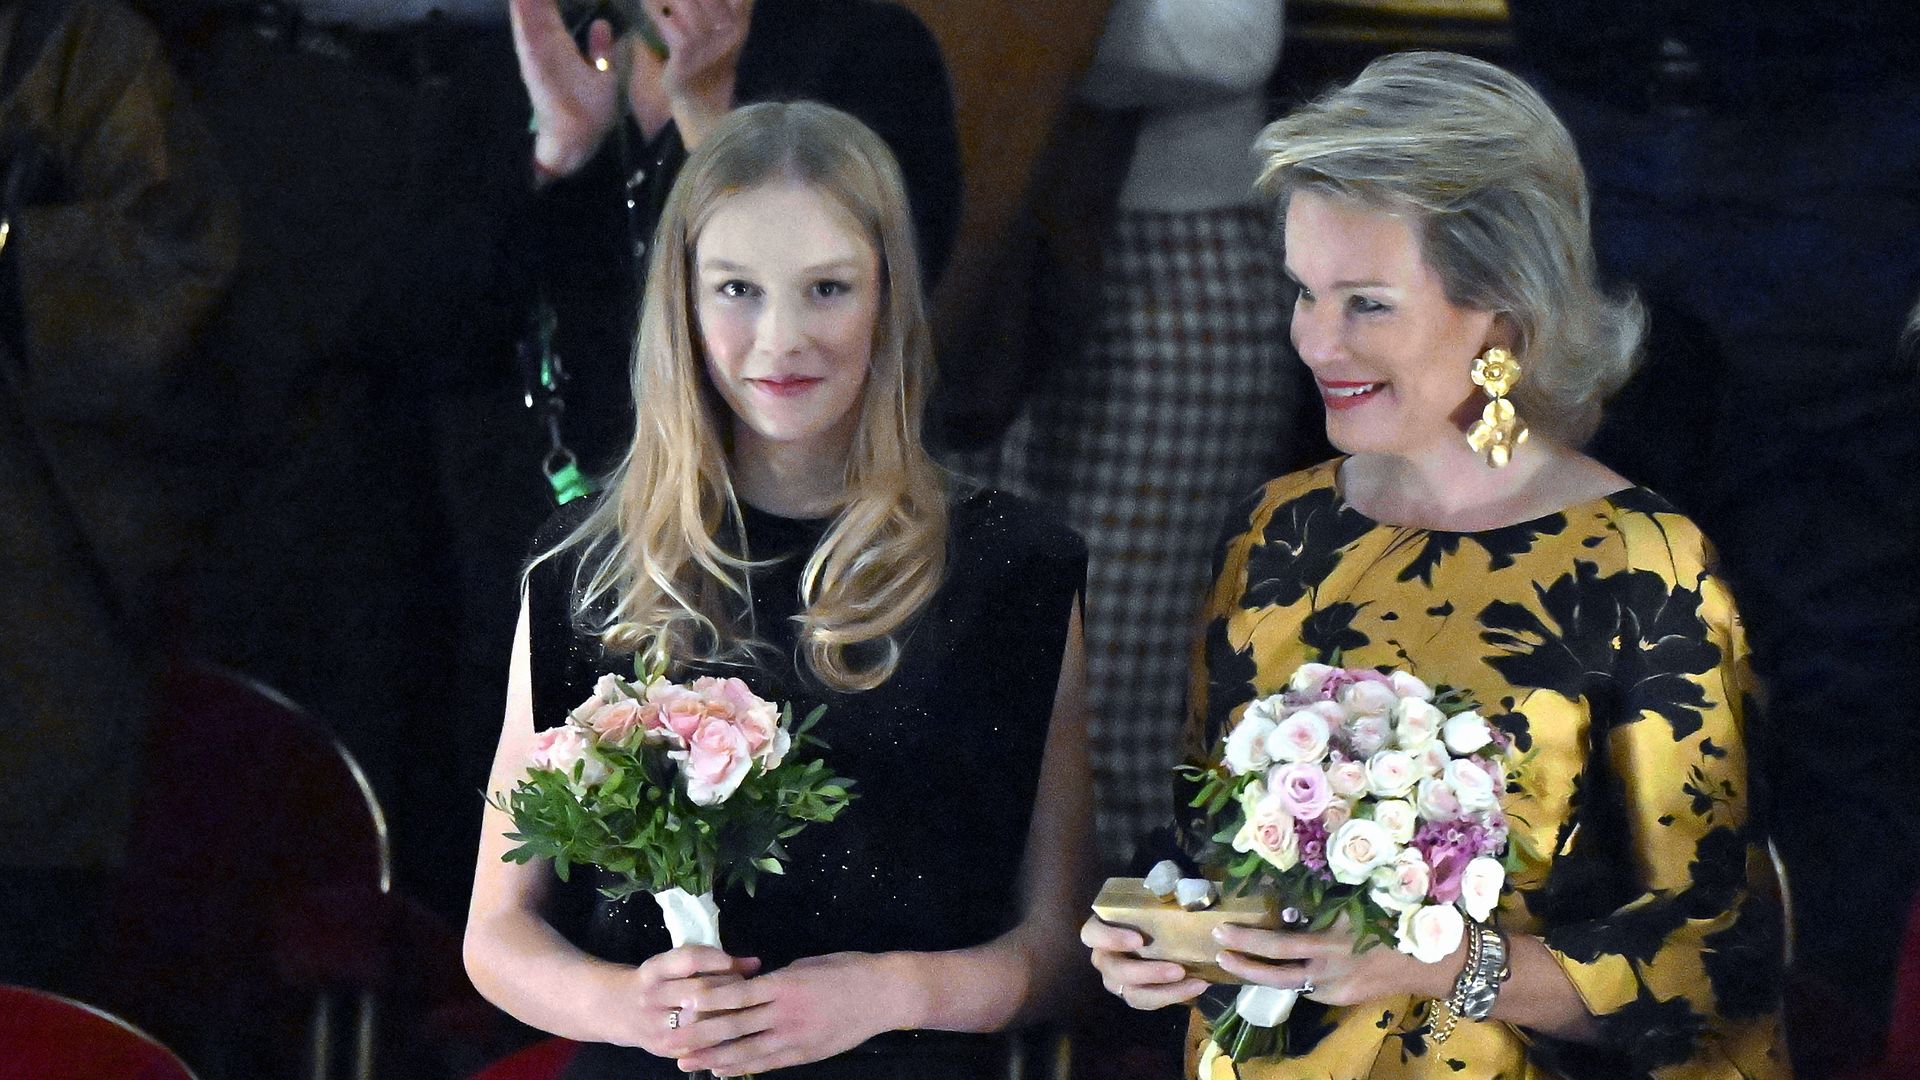 Princess Eleonore and Queen Mathilde of Belgium pictured during a royal visit to the opera Cassandra